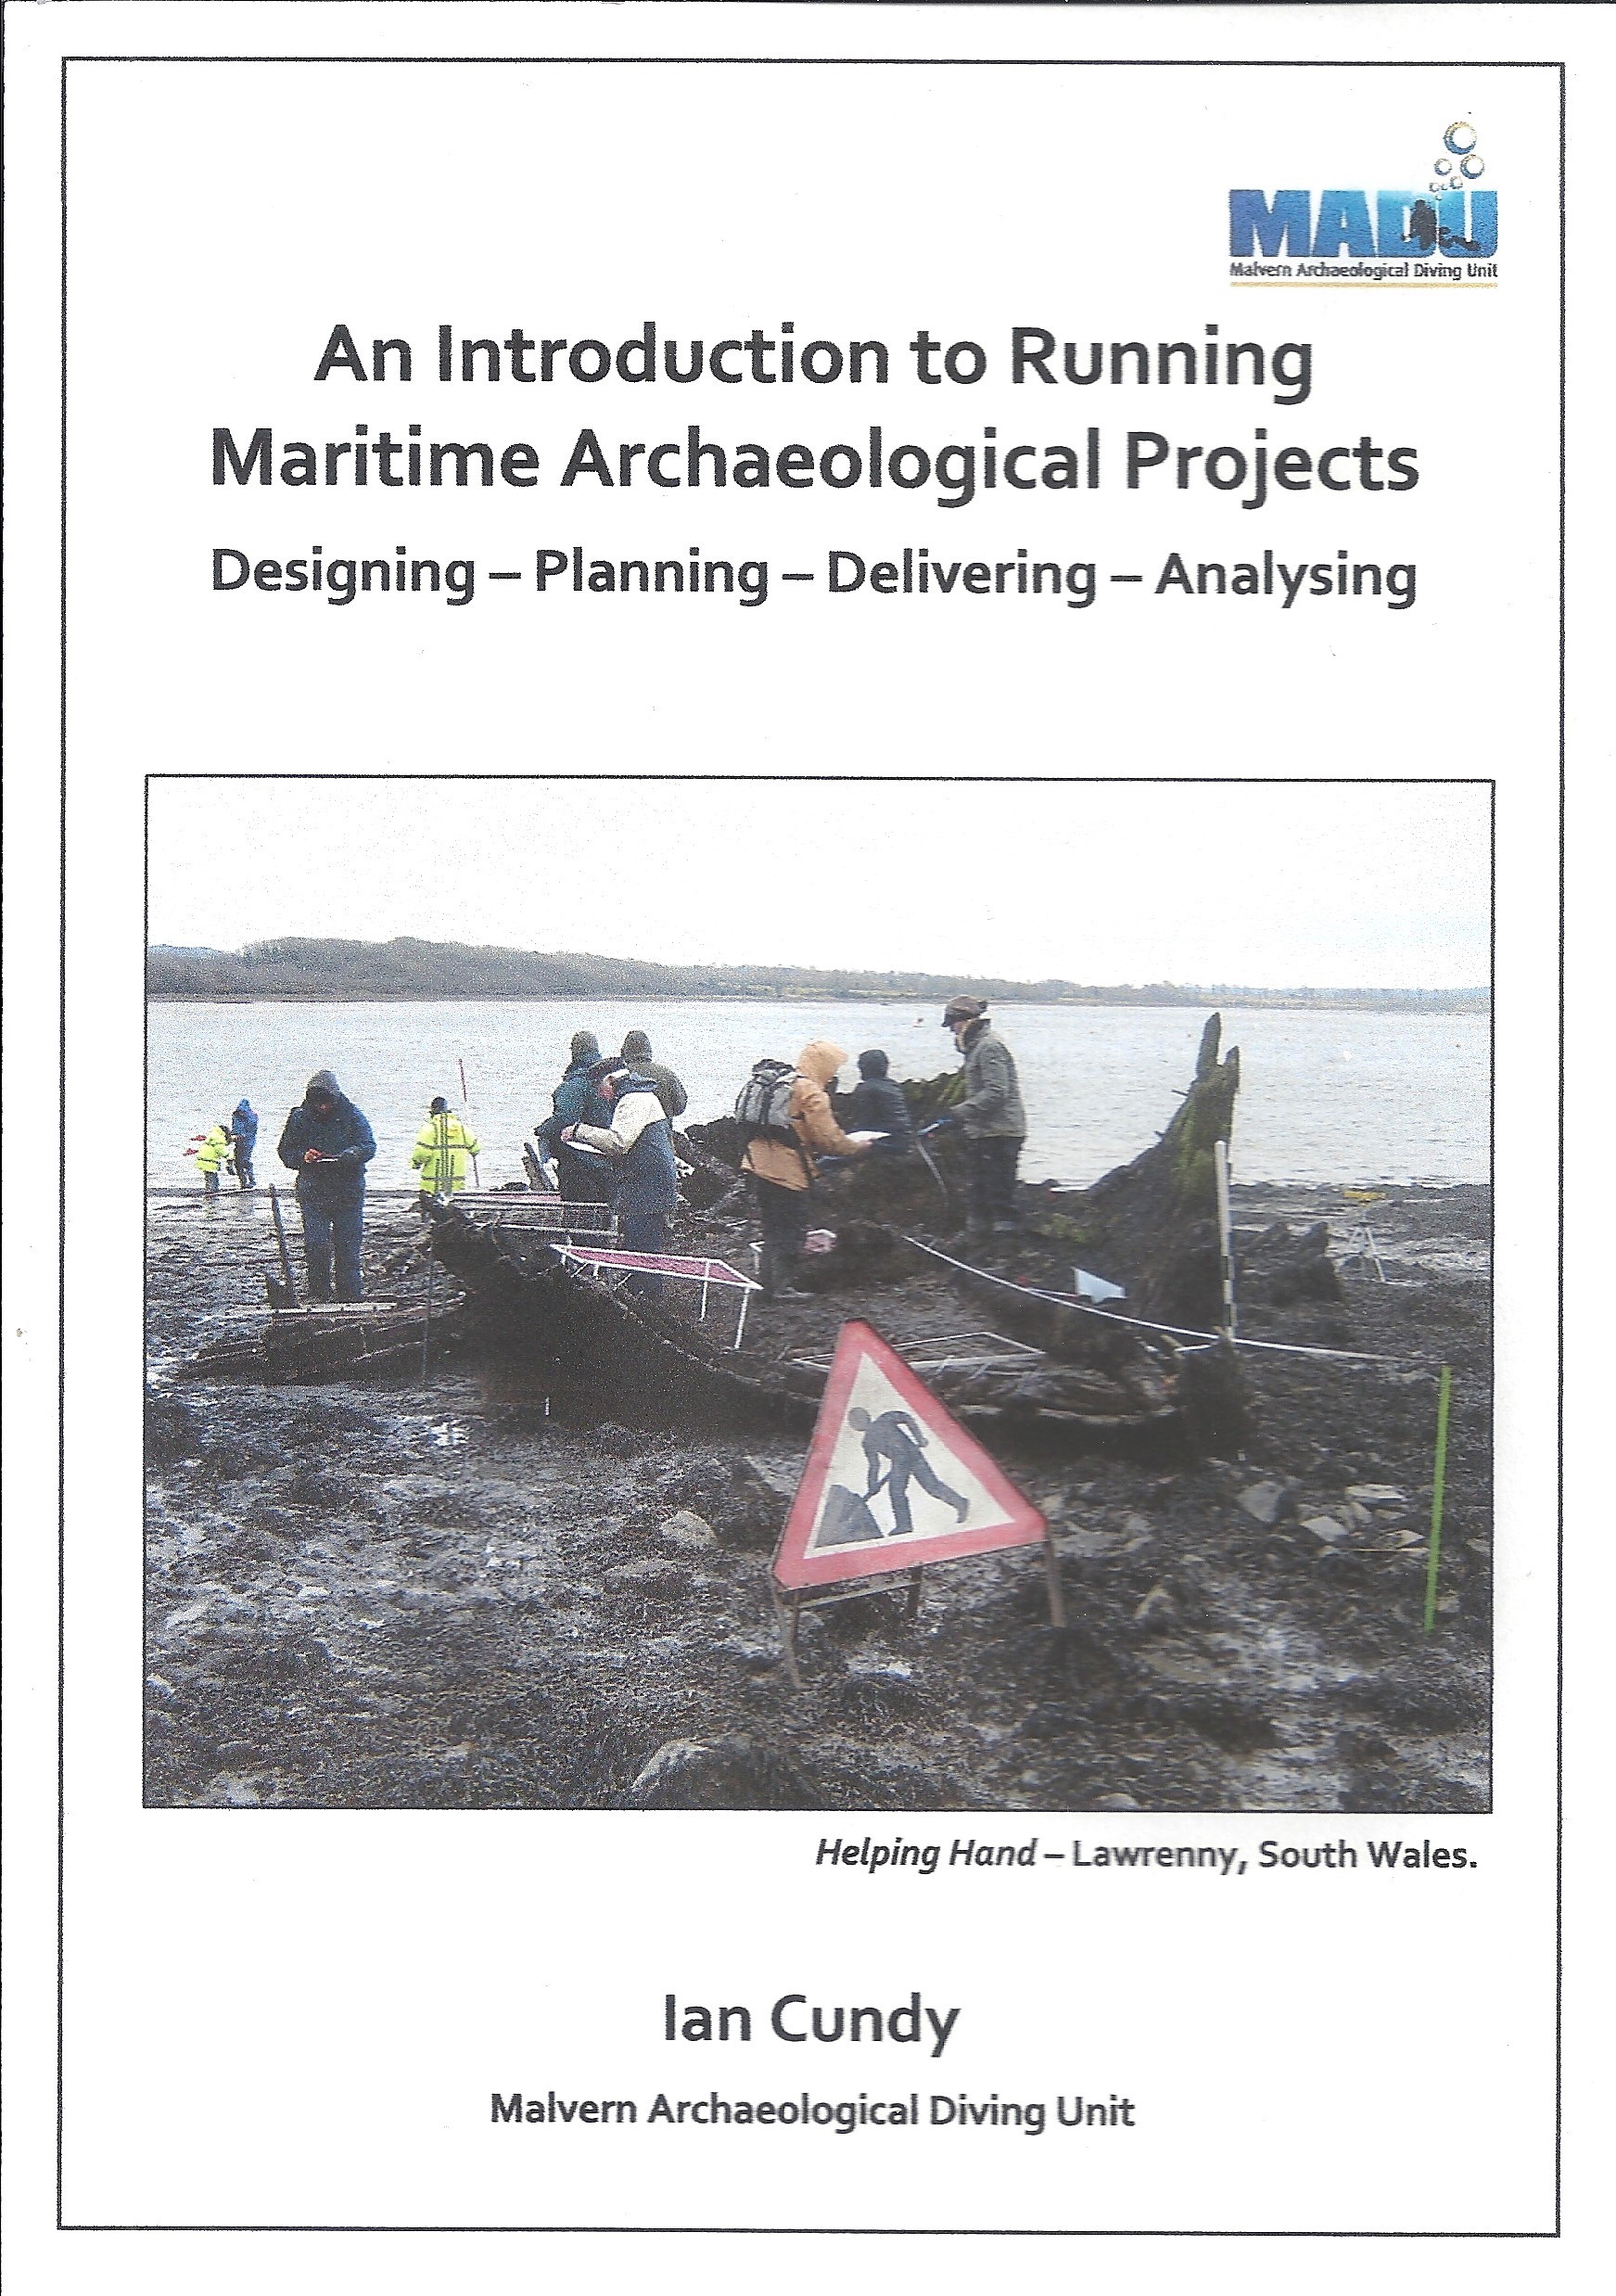 An Introduction to Running Maritime Archaeological Projects